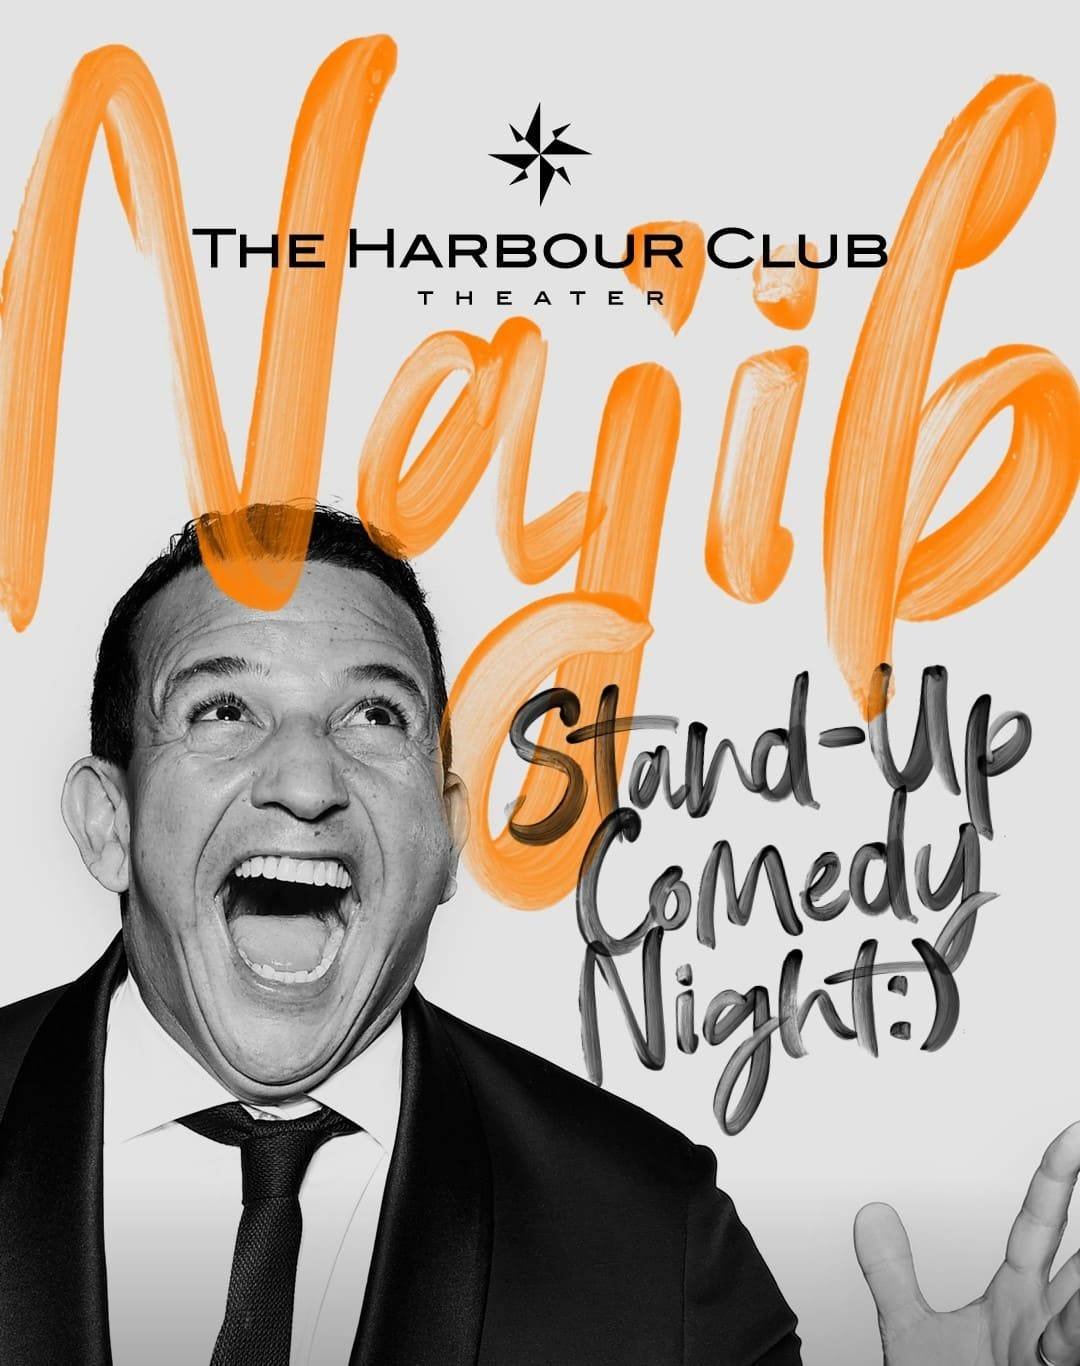 The Harbour Club Amsterdam Oost Tickets